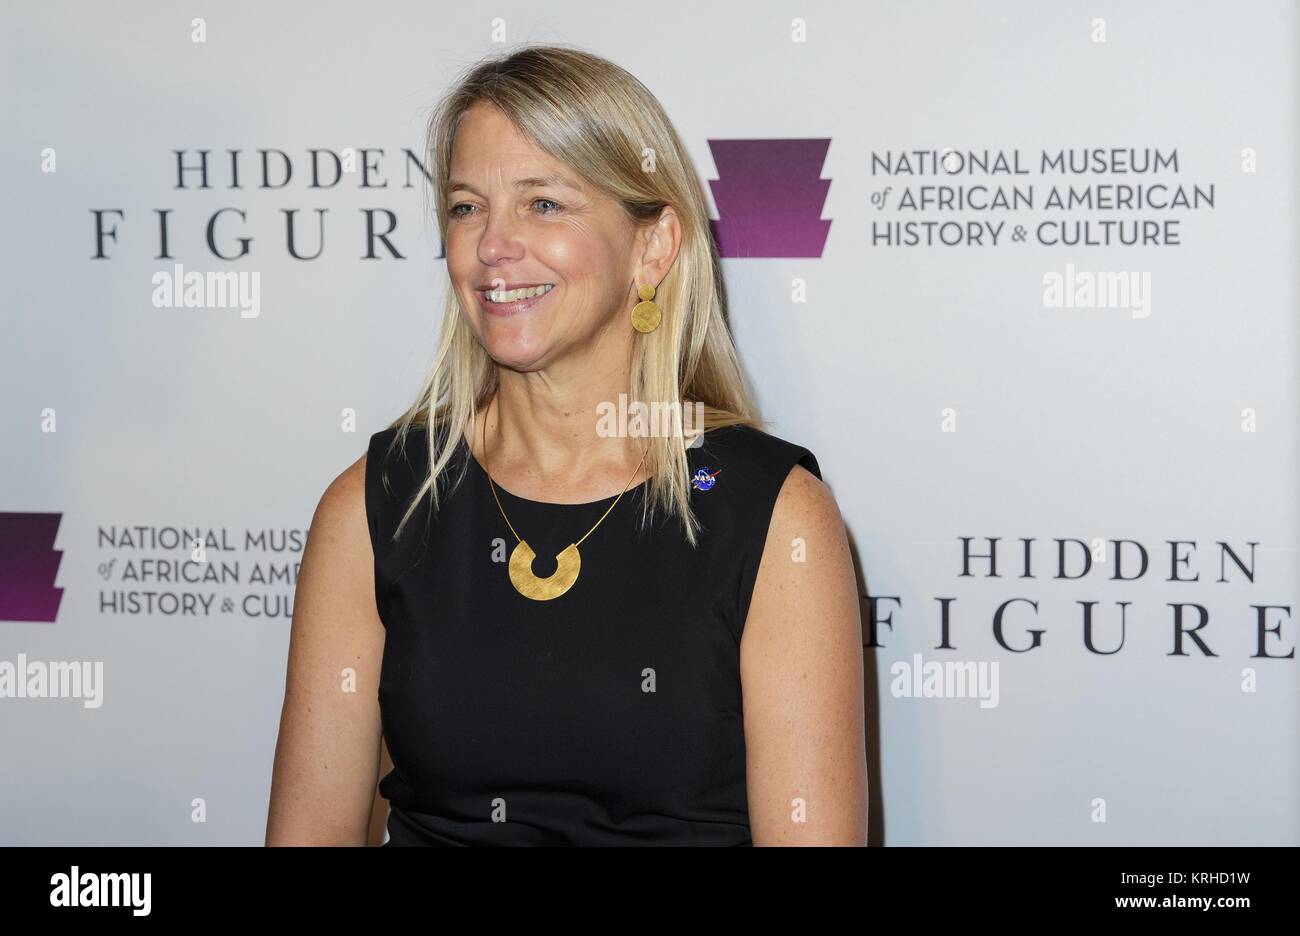 NASA Deputy Administrator Dava Newman walks the red carpet during a screening of the film Hidden Figures at the Smithsonian National Museum of African American History and Culture December 14, 2016 in Washington, DC. The film is based on the lives of three African-American mathematicians who worked for NASA during the John Glenn Friendship 7 mission in 1962. Stock Photo